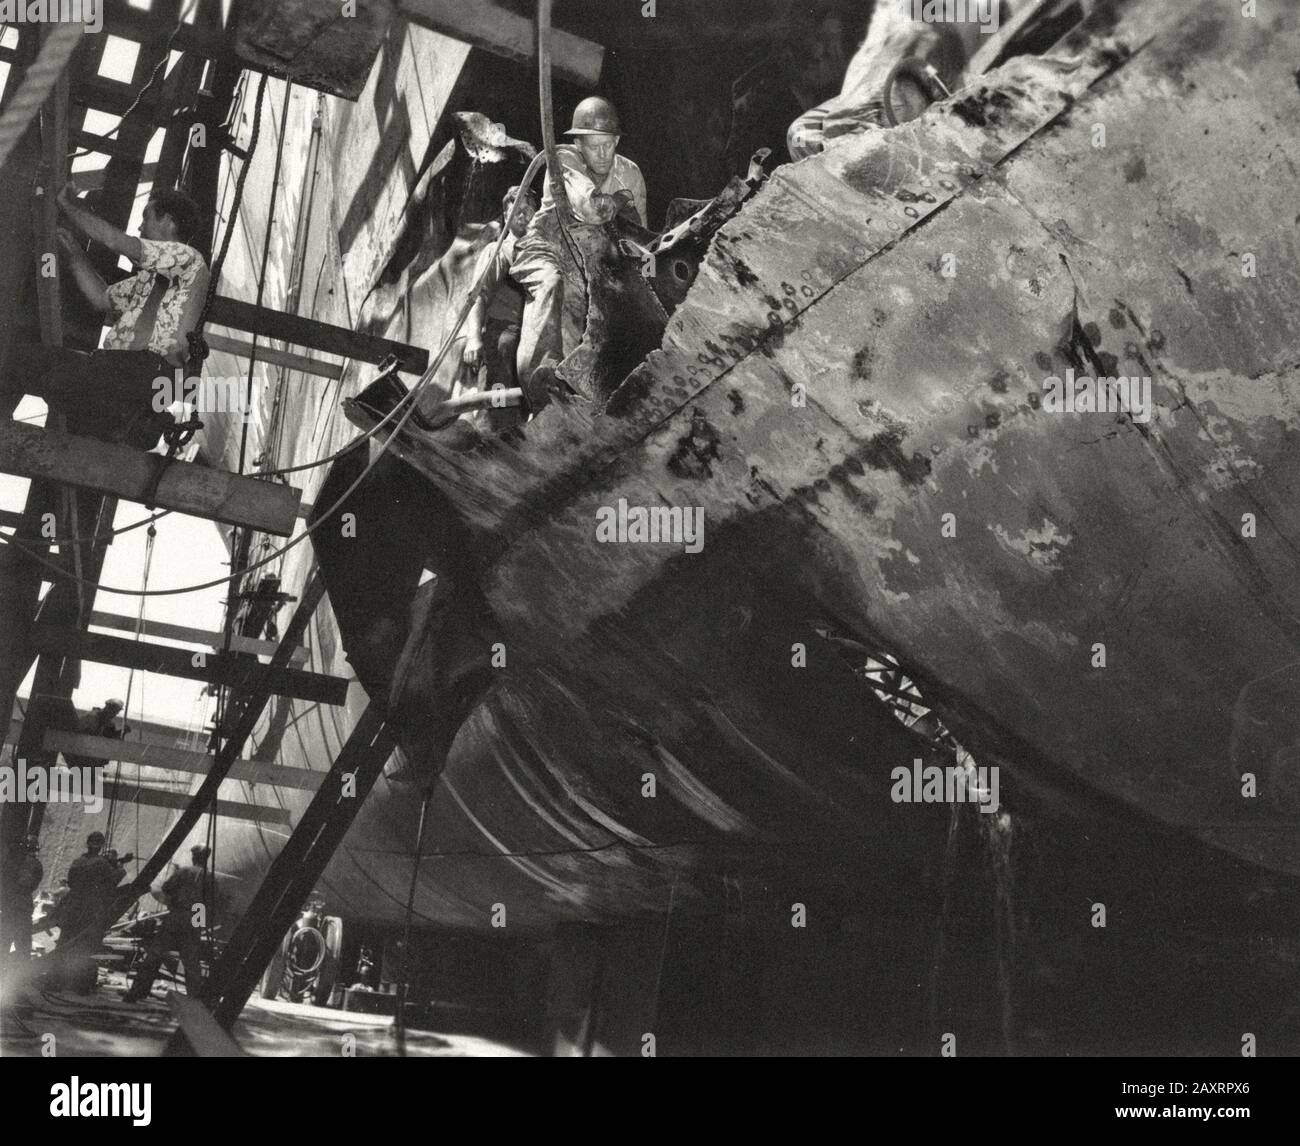 Workers work to repair damage to USS North Carolina caused by an IJN Long Lance torpedo fired by submarine I-19 on September 15, 1942. The hole measur Stock Photo